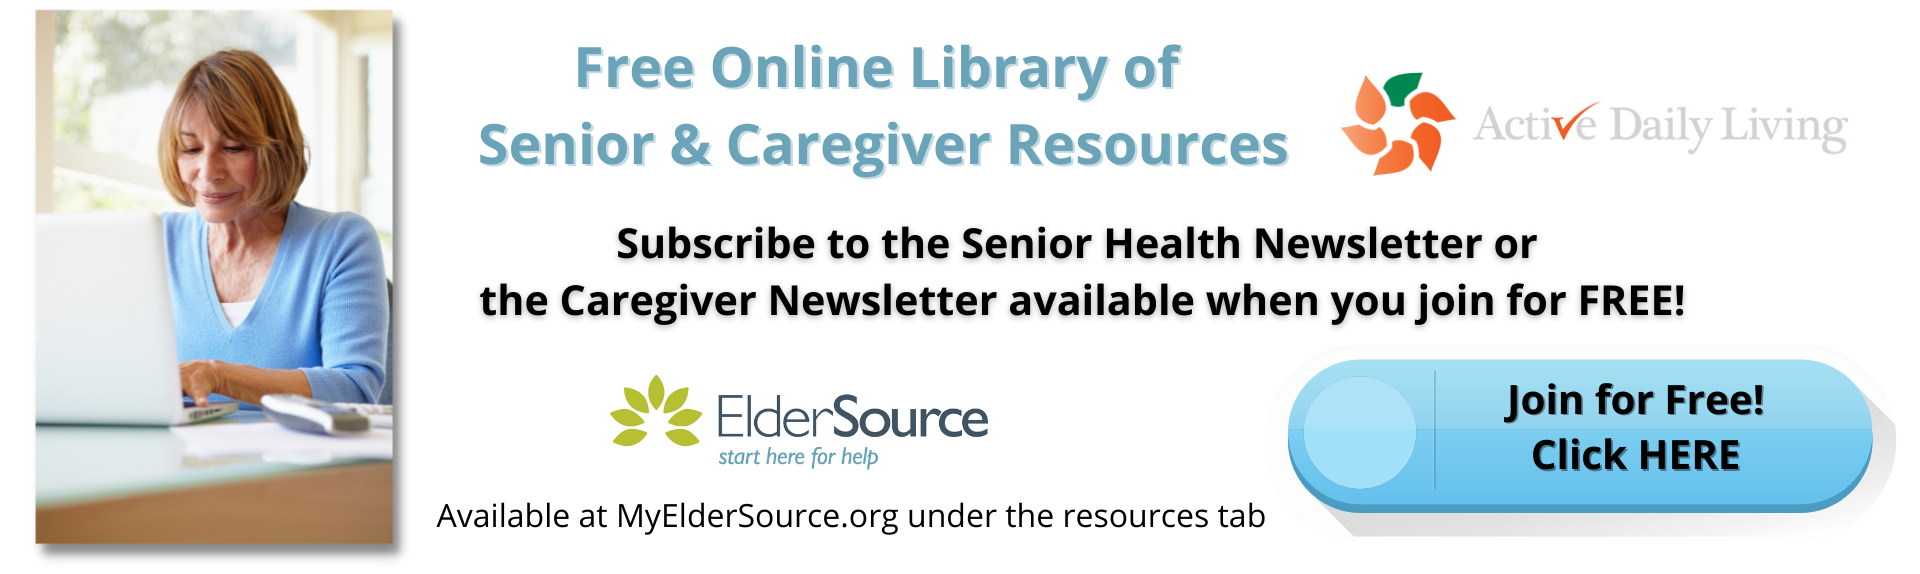 Active Daily a Free Online Library of Caregiver and Senior Resources